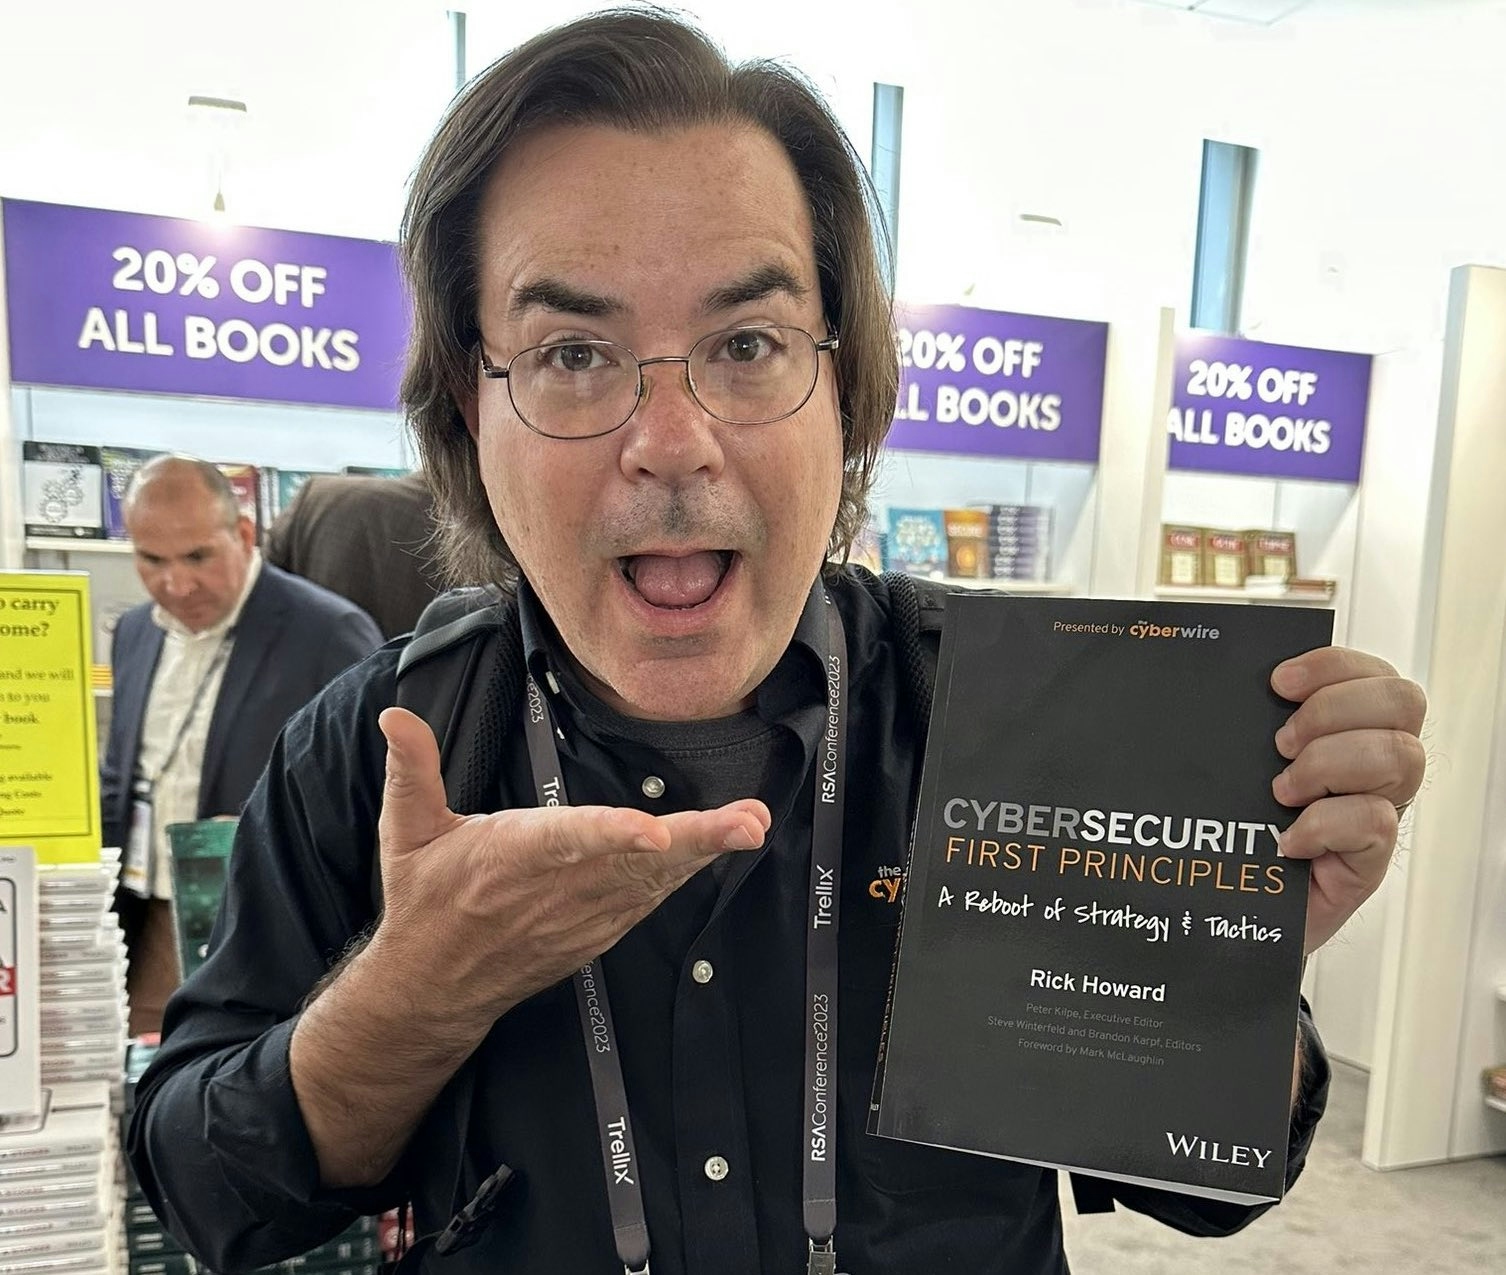 The Cybersecurity first principles book in reader's hands